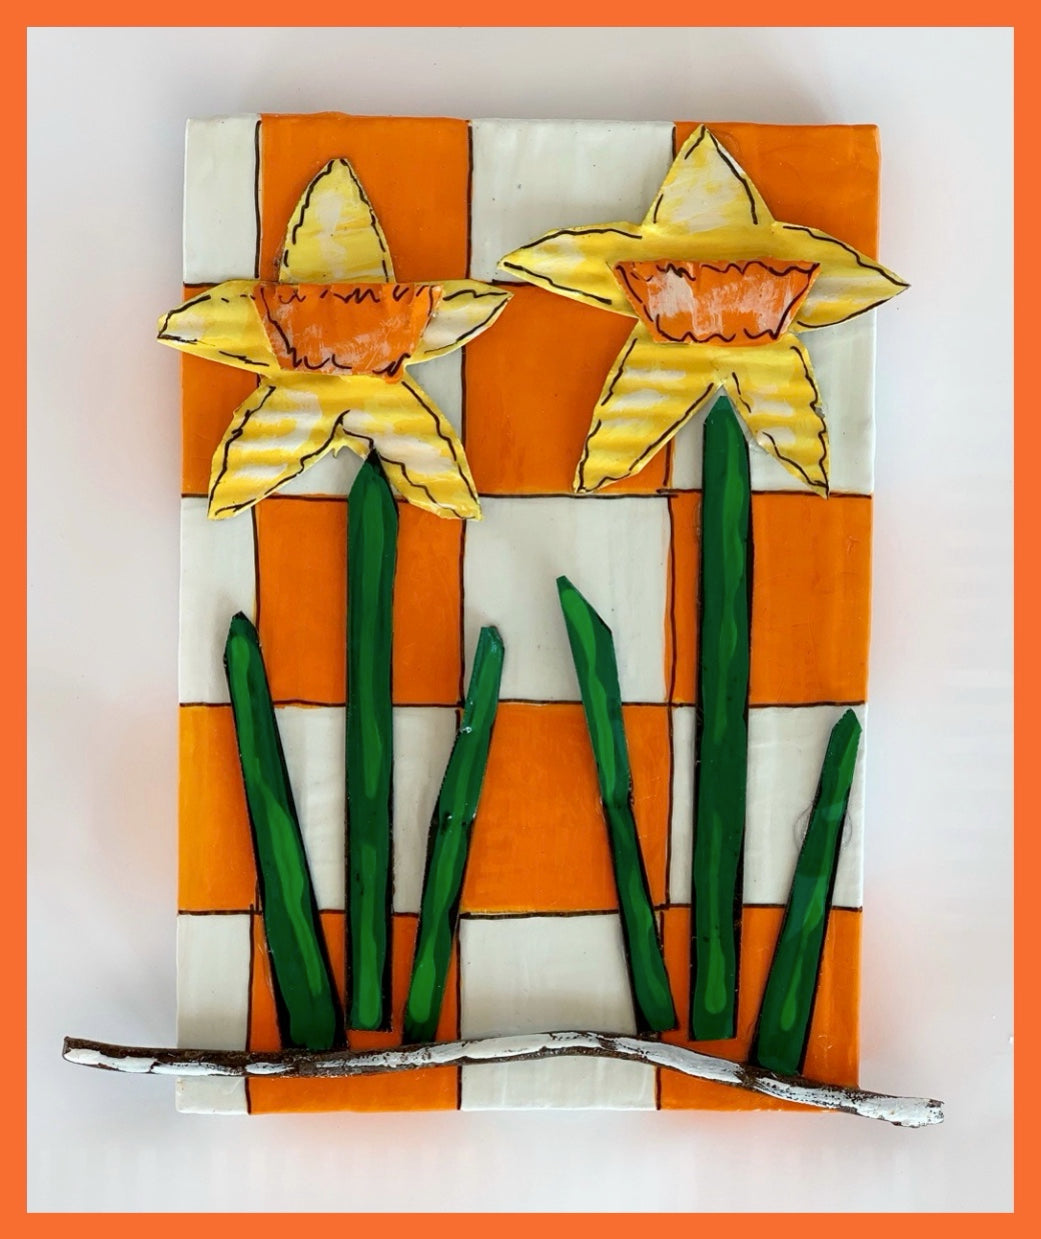 Two Daffodils on Orange and White